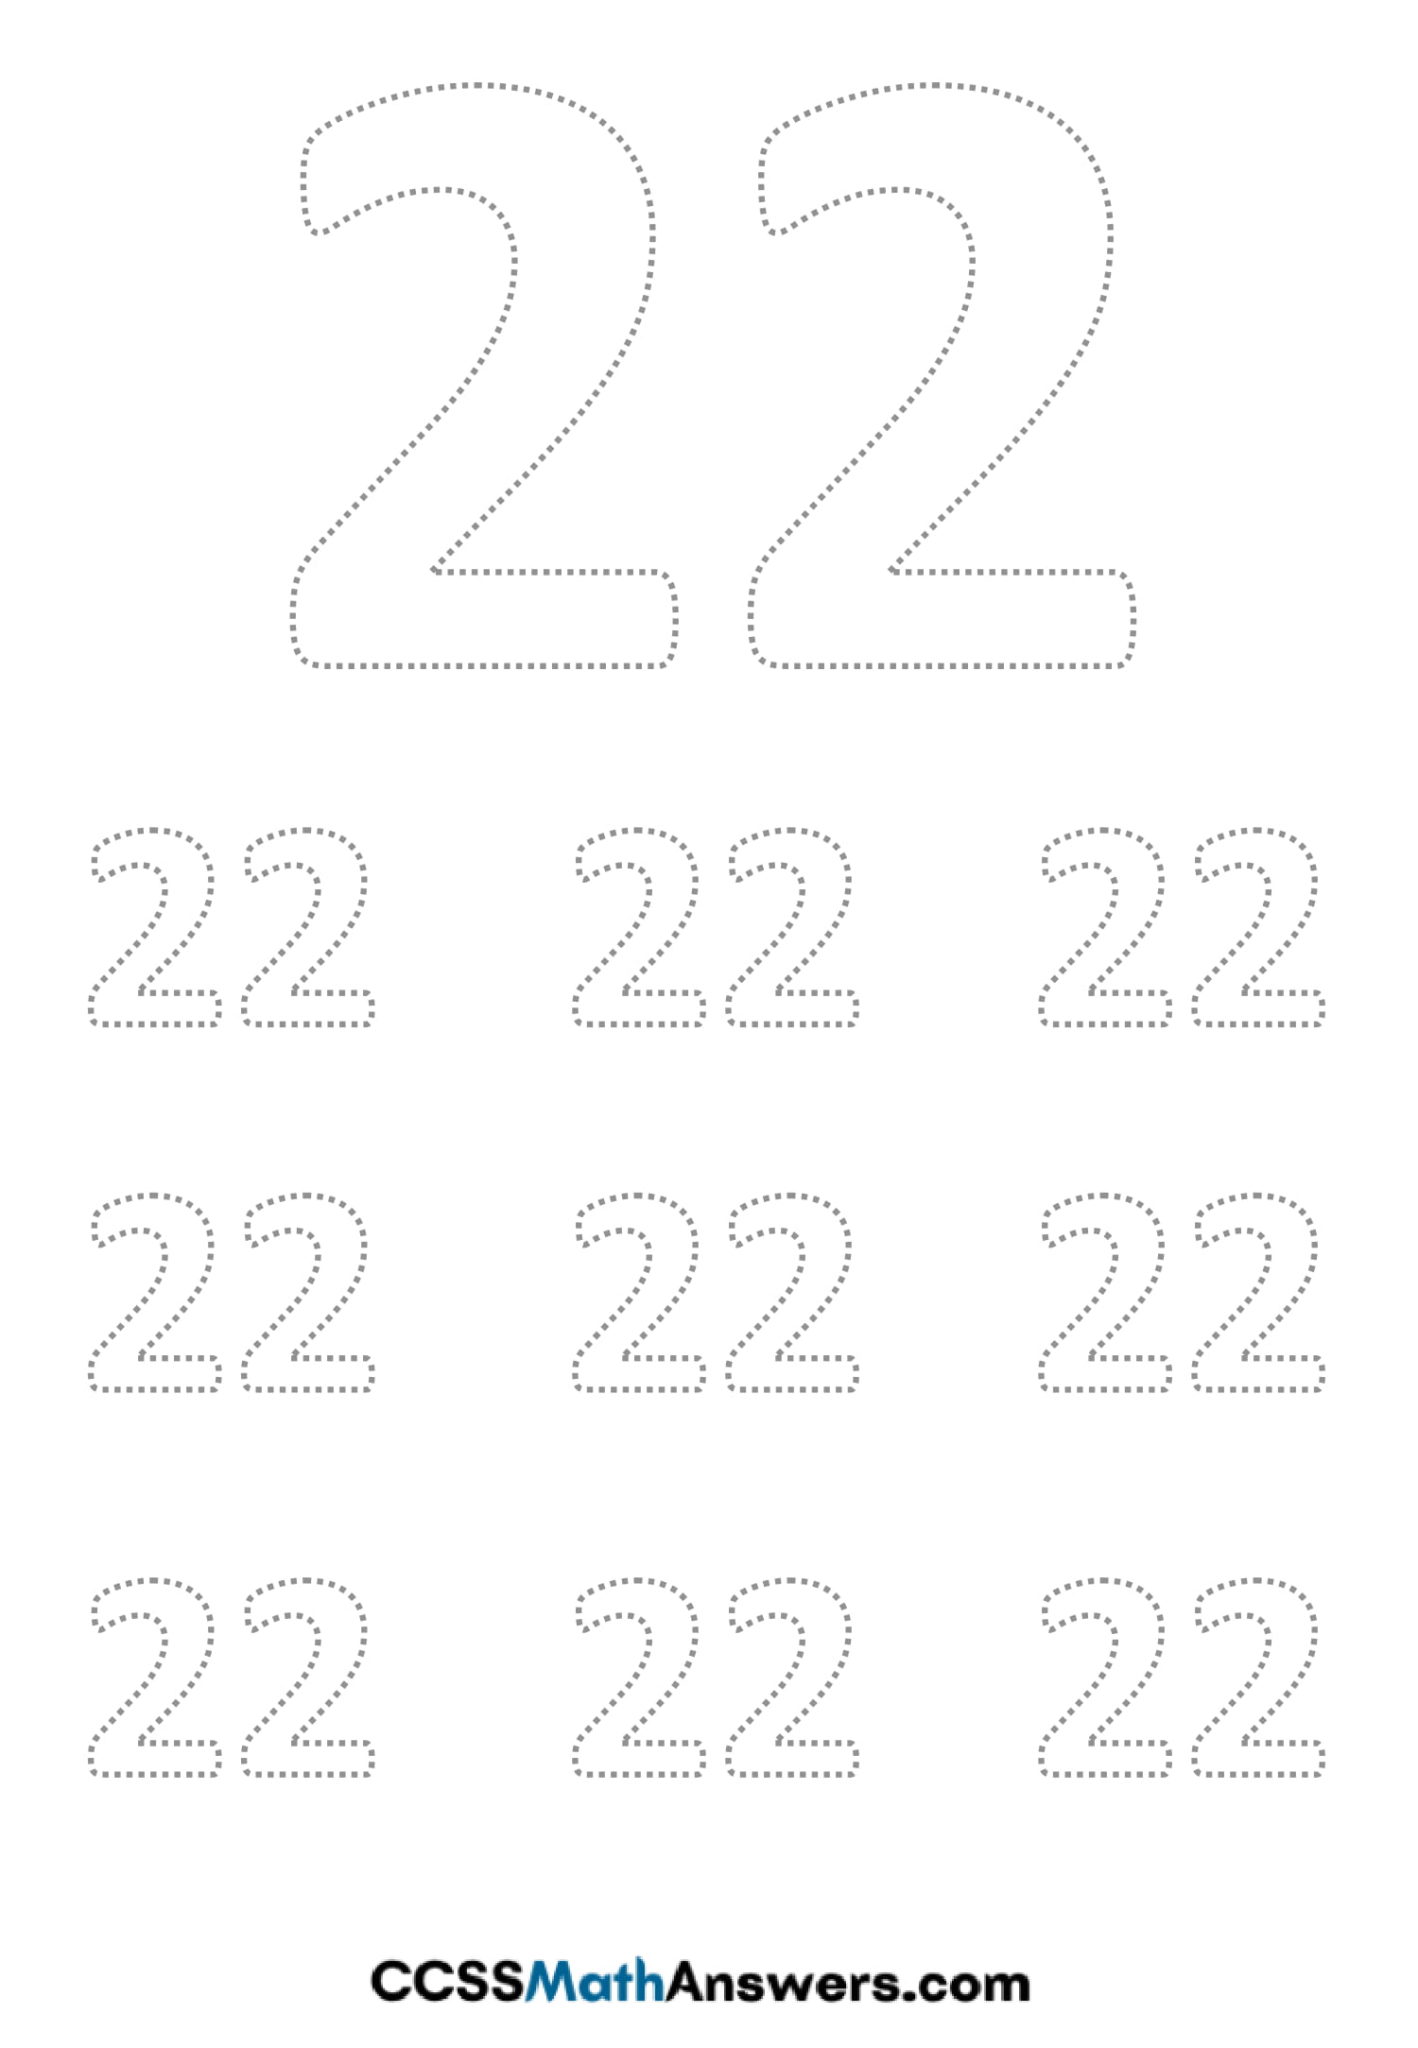 worksheet-on-number-22-free-printable-number-22-tracing-counting-activity-worksheets-for